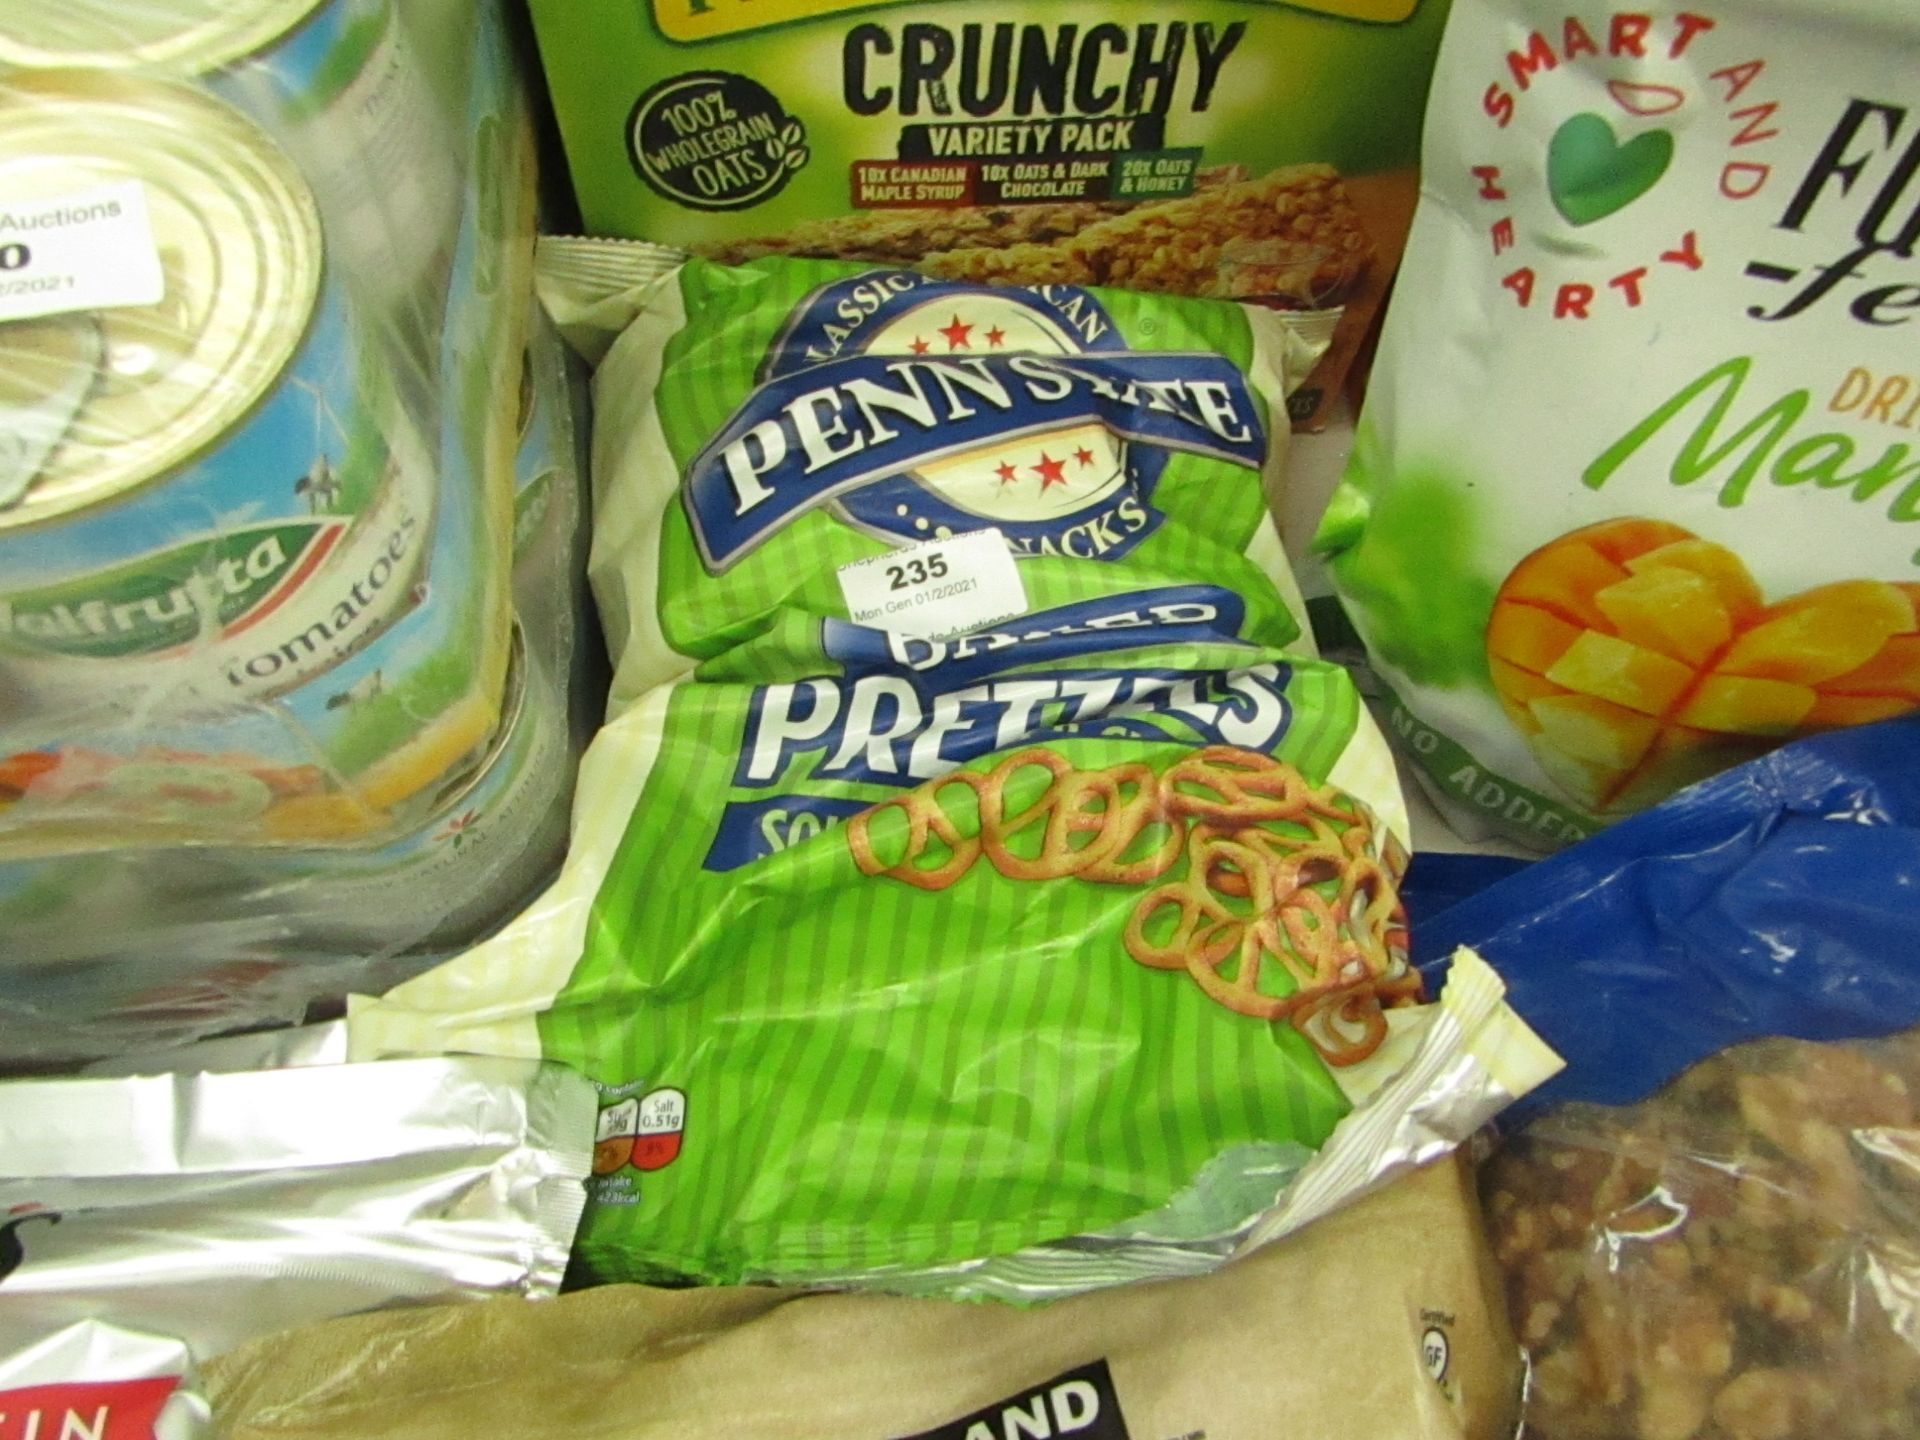 Classic American Penn State Snacks - Baked sour cream & chive Pretzels - 650g - Best before 08/